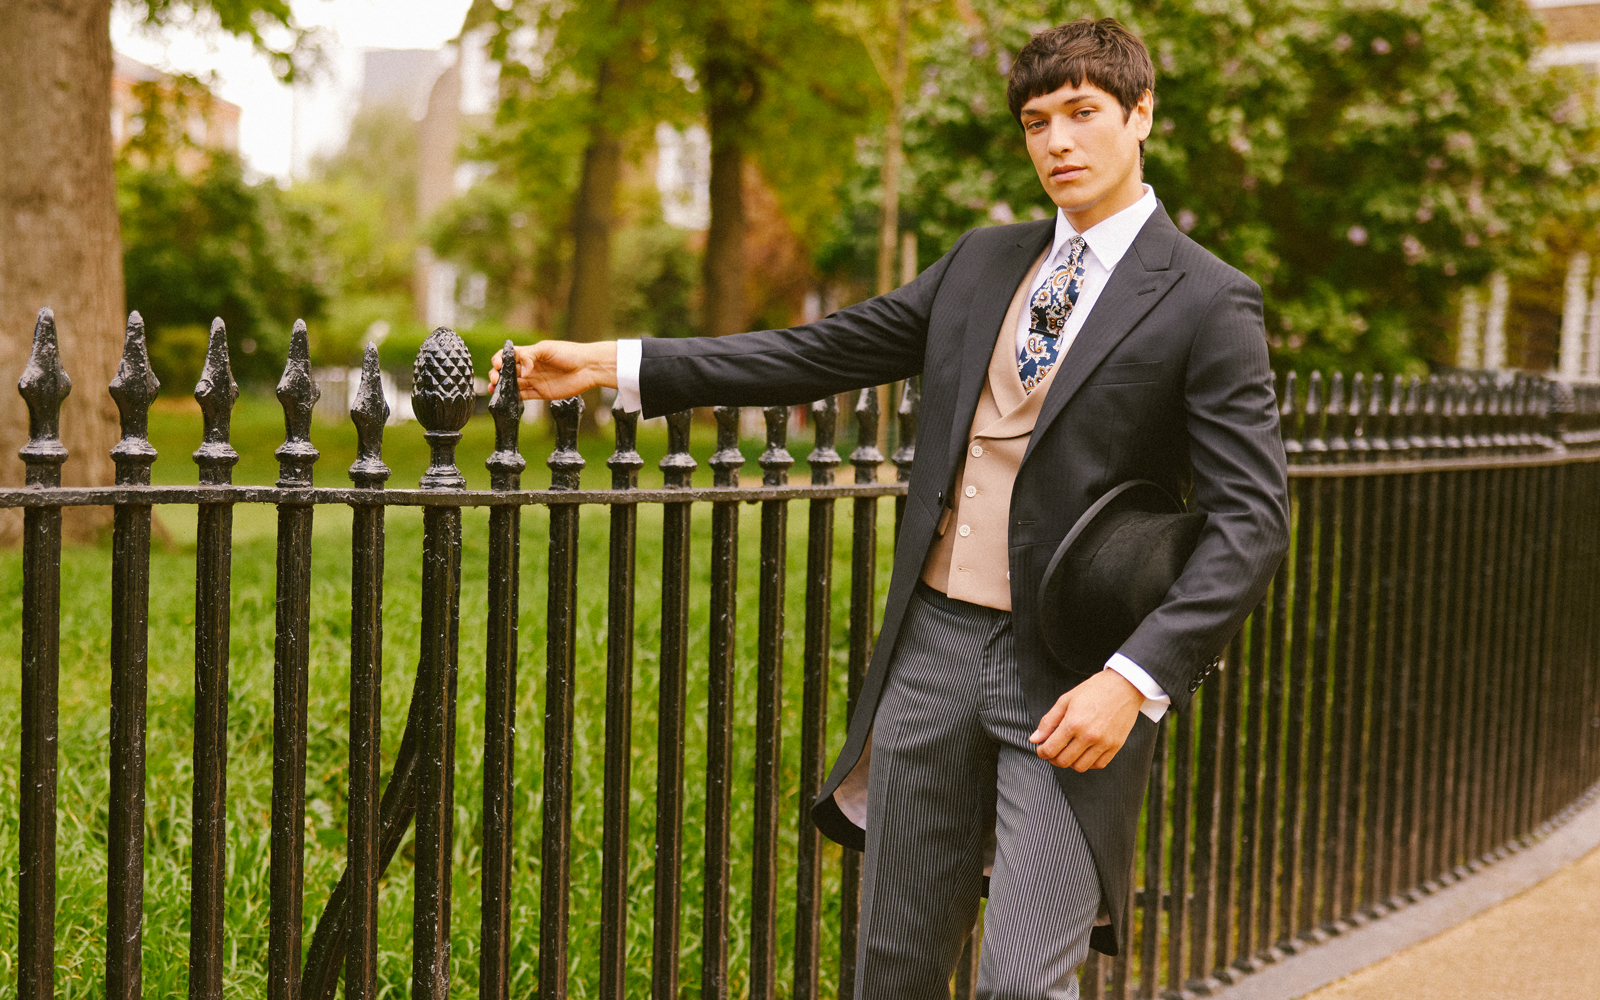 Man in three piece wedding suit and floral tie leaning against park railings in summer.